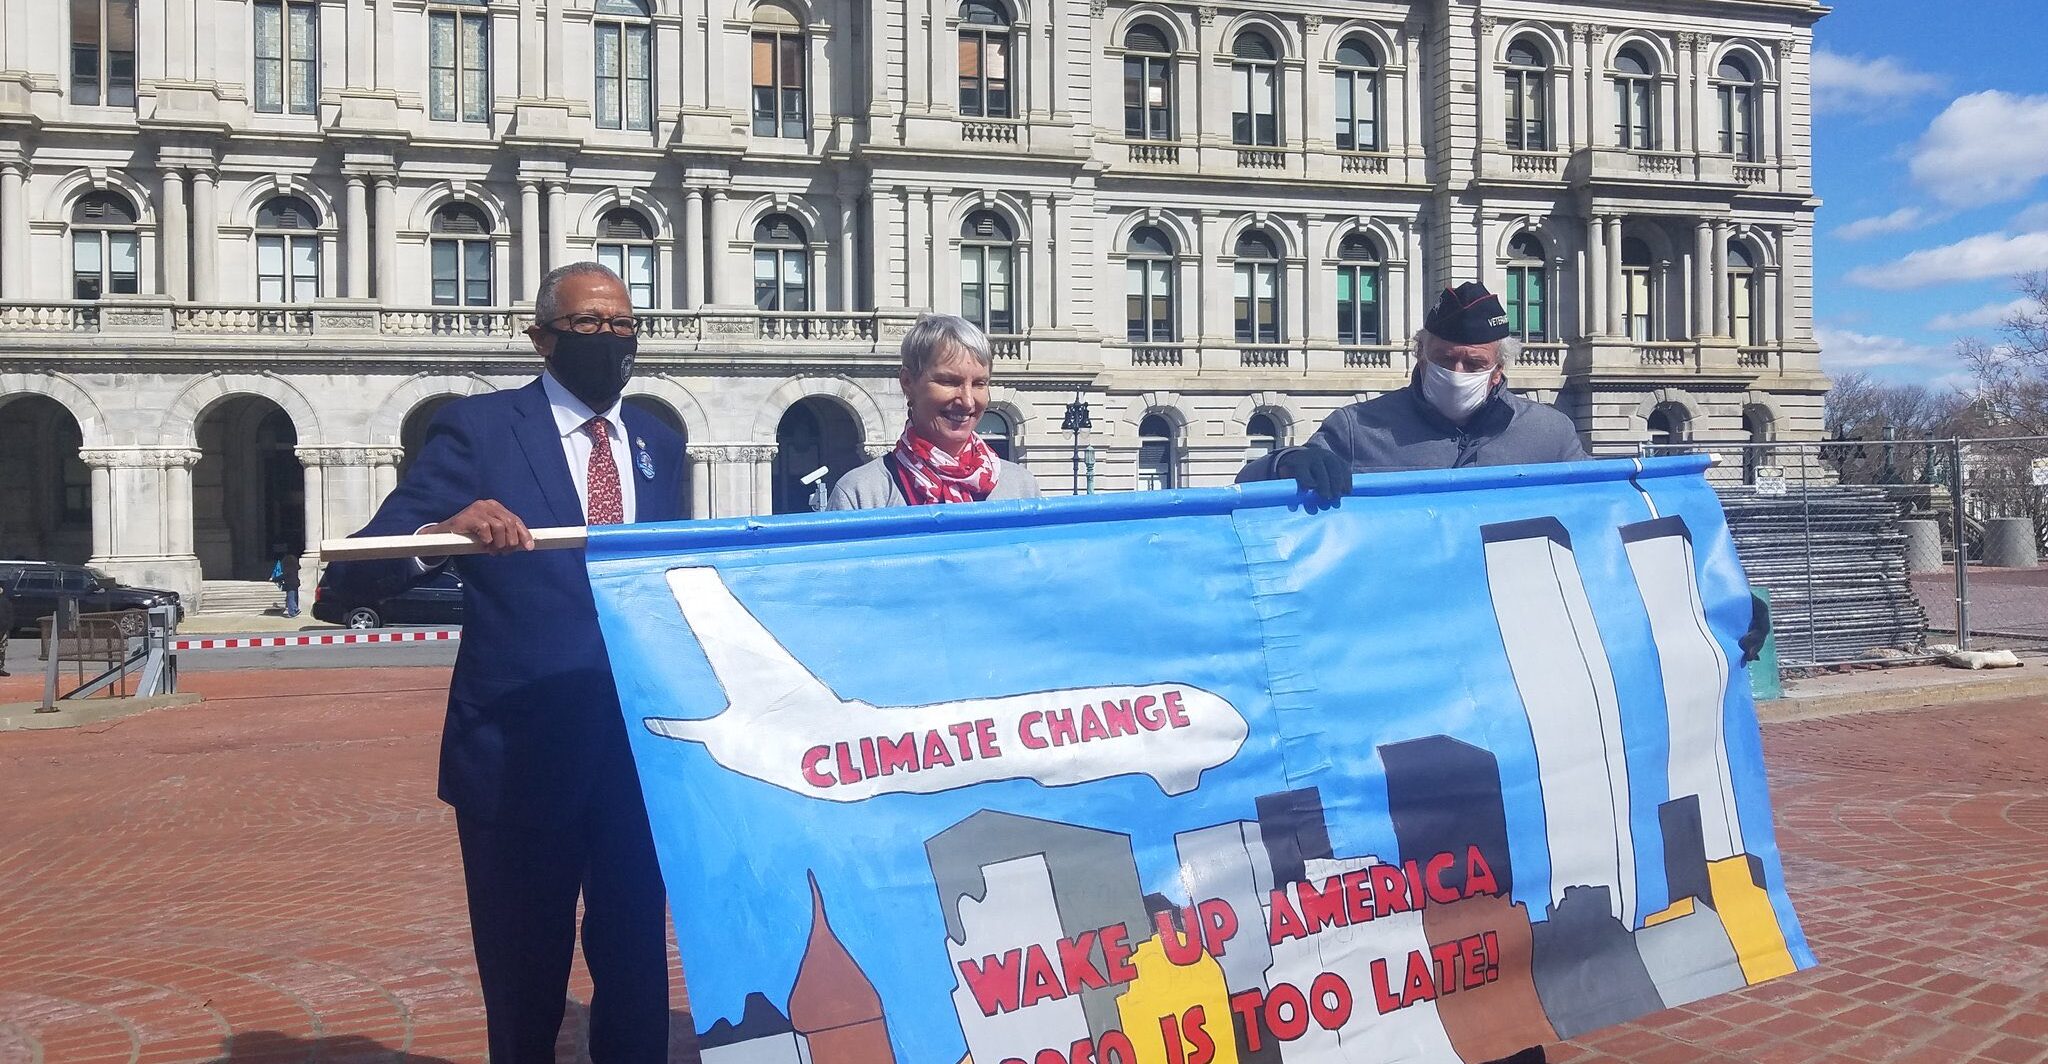 New York Democrats Apologize For Holding Banner Comparing Climate Change to Plane That Hit World Trade Center